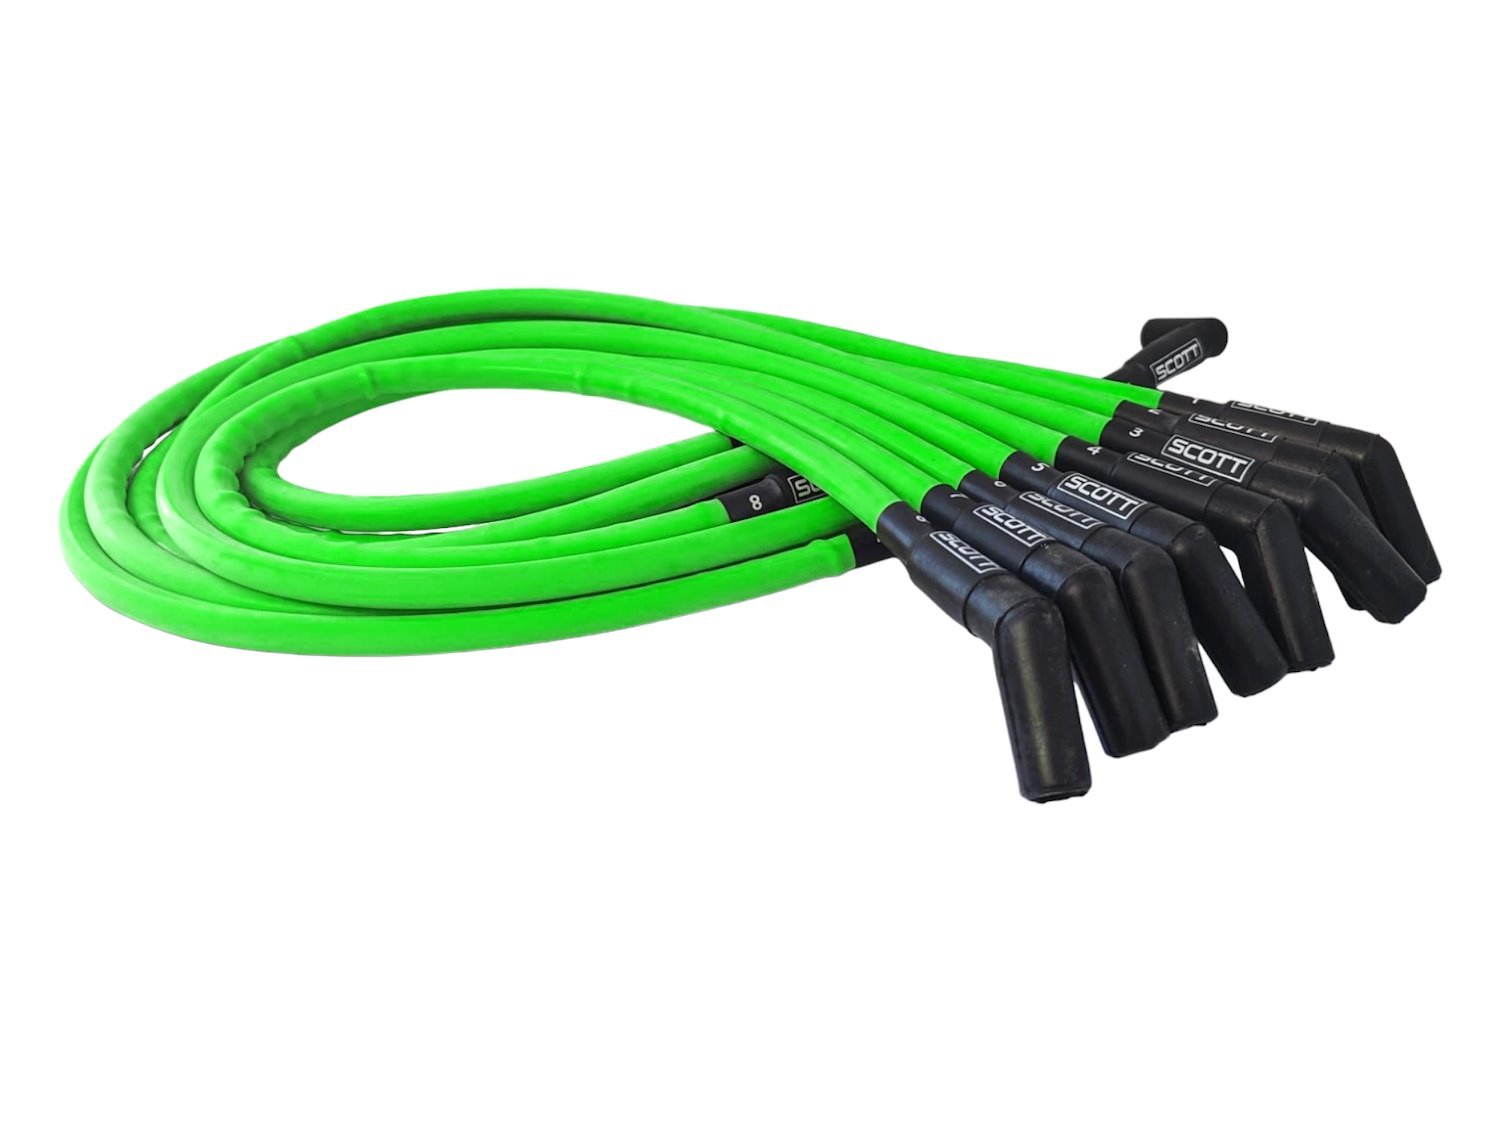 SPW-CH-415-8 High-Performance Silicone-Sleeved Spark Plug Wire Set for Big Block Chevy, Over Valve Cover [Fluorescent Green]